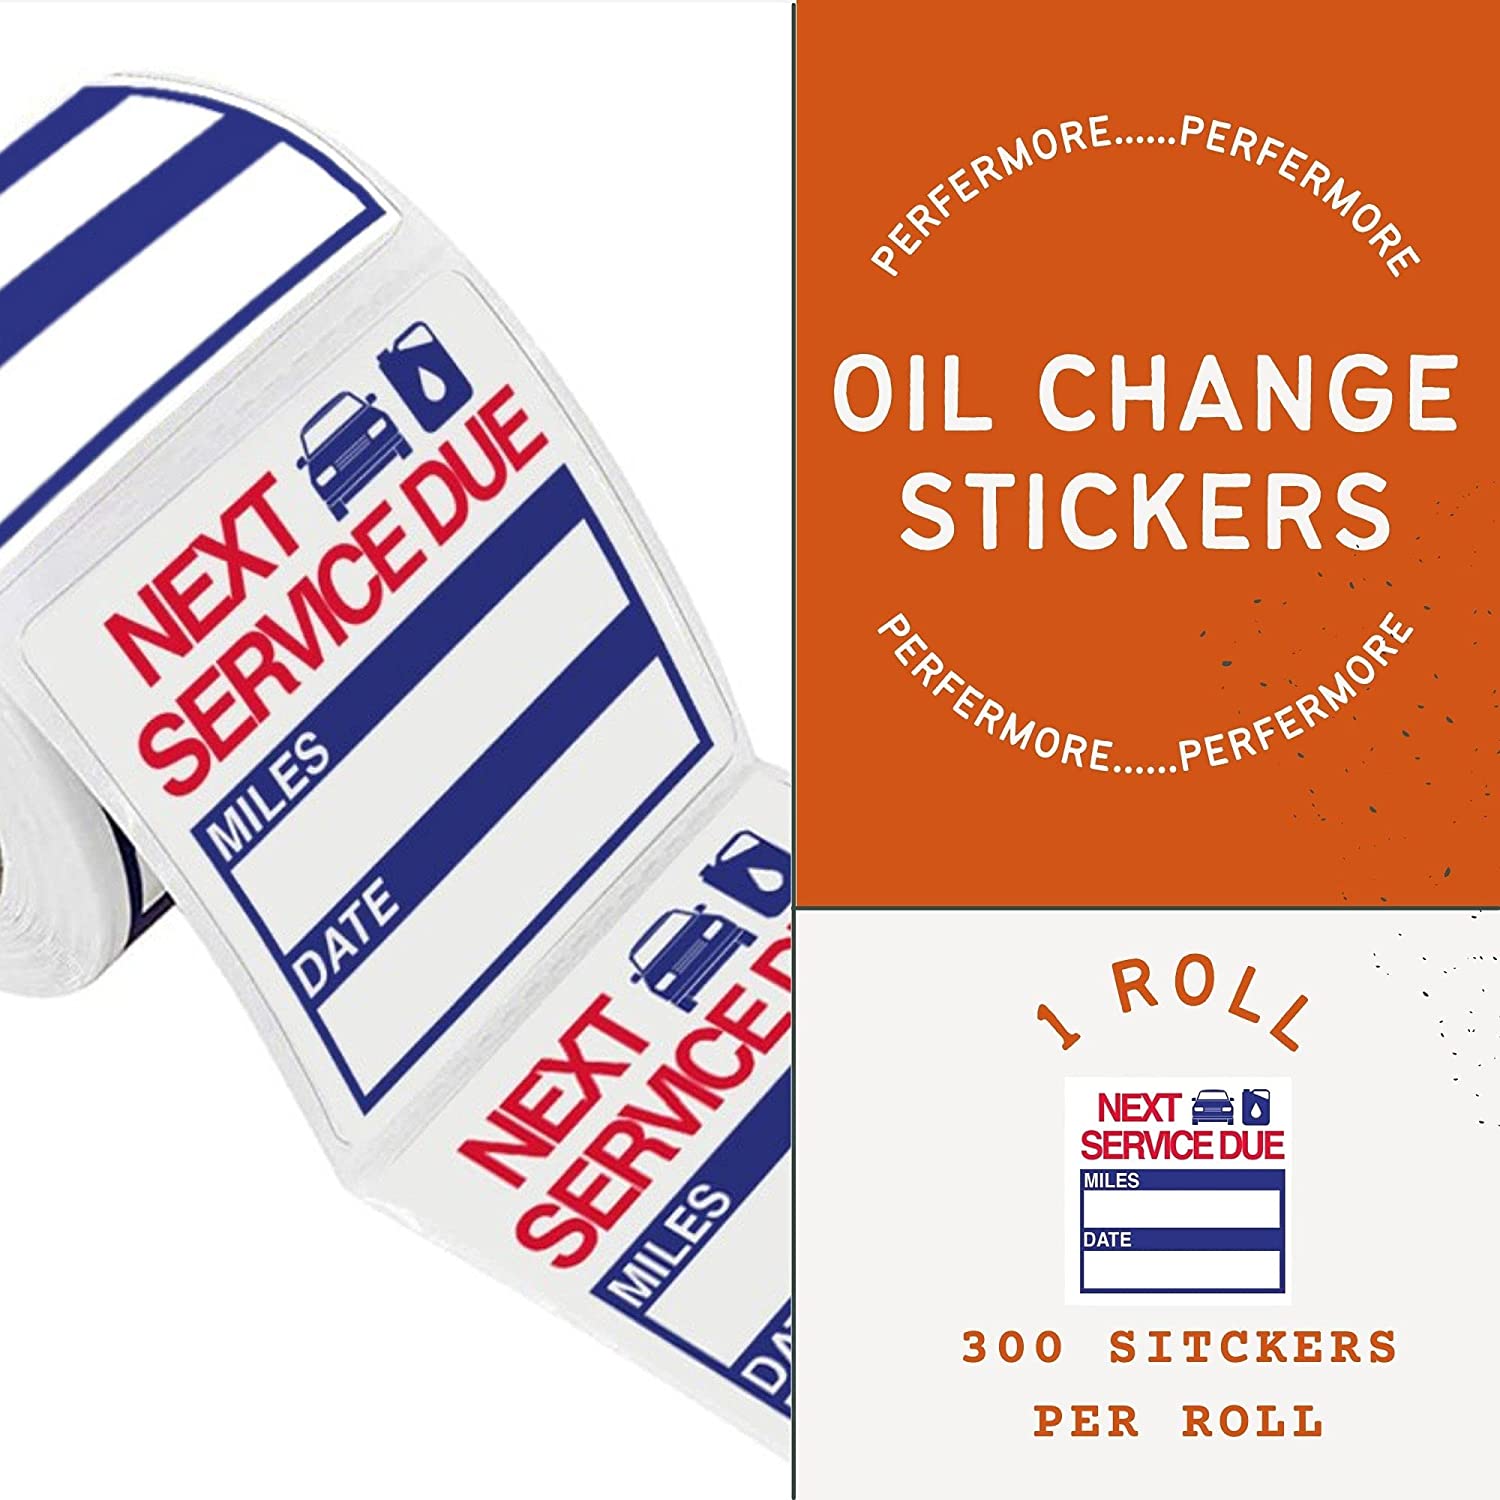 2x2 Inch Oil Change Auto Service Reminder Sticker Roll, Next Service Due Labels for Cars Windows Windshield (1 Roll)